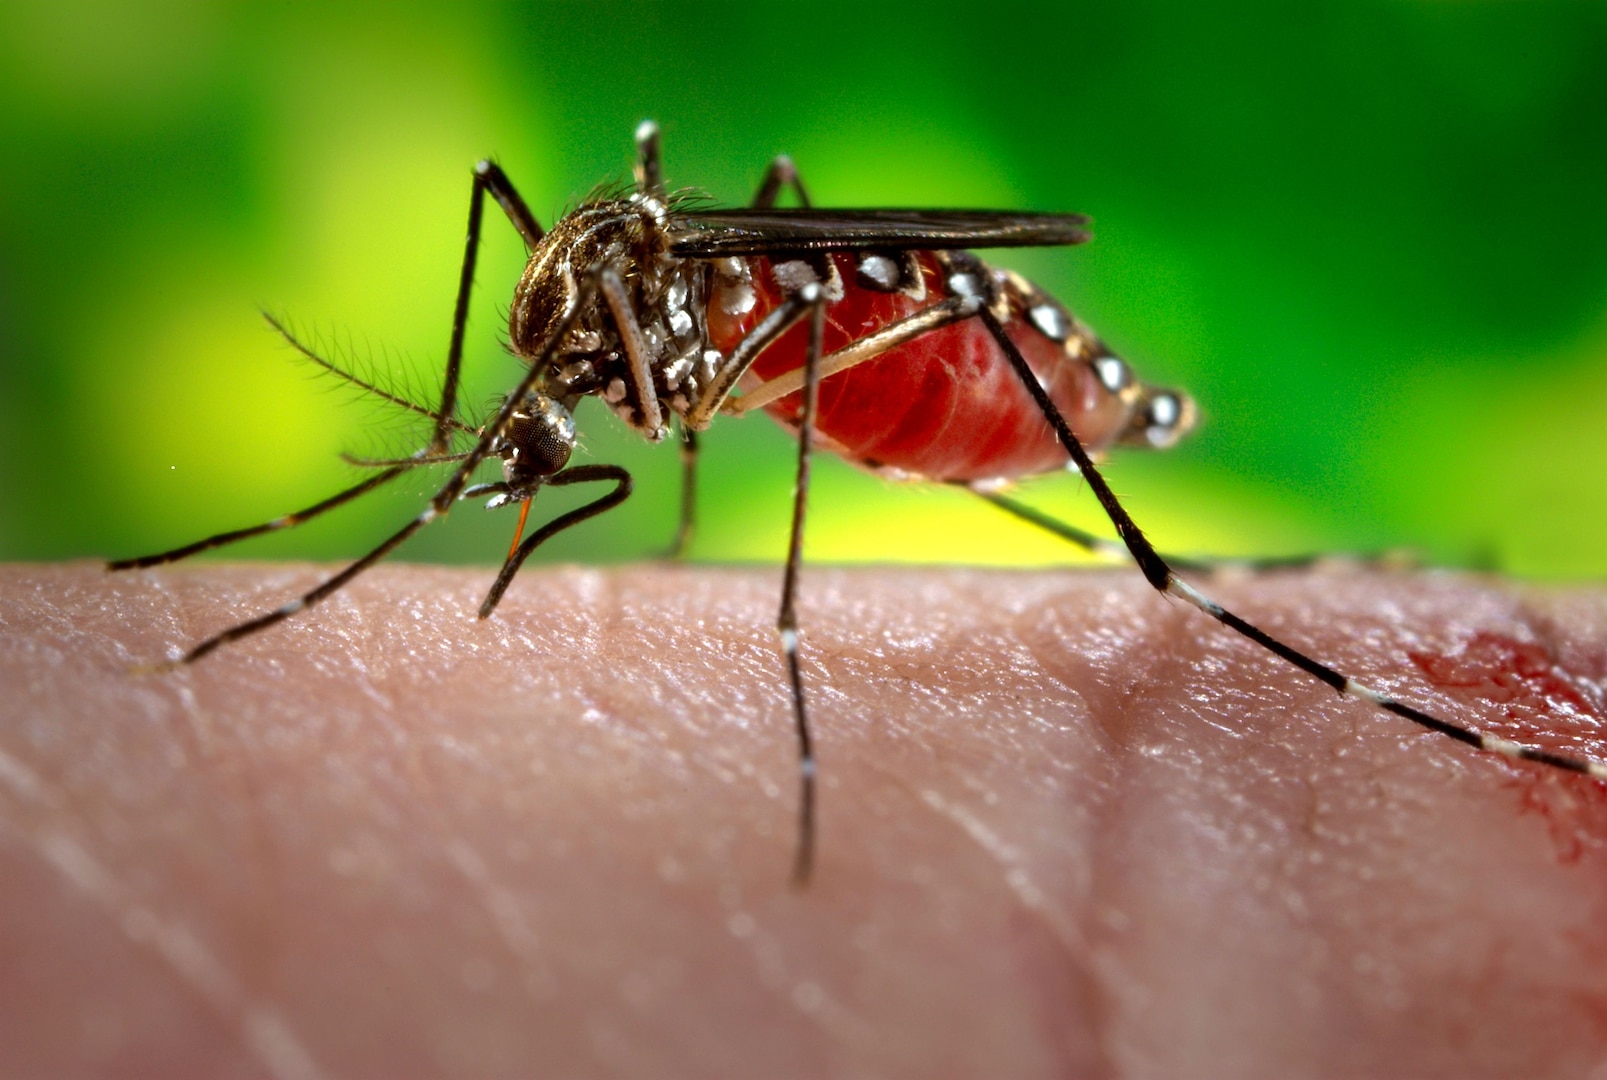 This 2006 photograph depicts a female Aedes aegypti mosquito, the species of mosquito primarily responsible for the spread of the Zika virus disease to people. The most common symptoms of Zika are fever, rash, joint pain, and conjunctivitis, or red eyes. The illness is usually mild, with symptoms lasting for several days to a week after being bitten by an infected mosquito. Centers for Disease Control photo